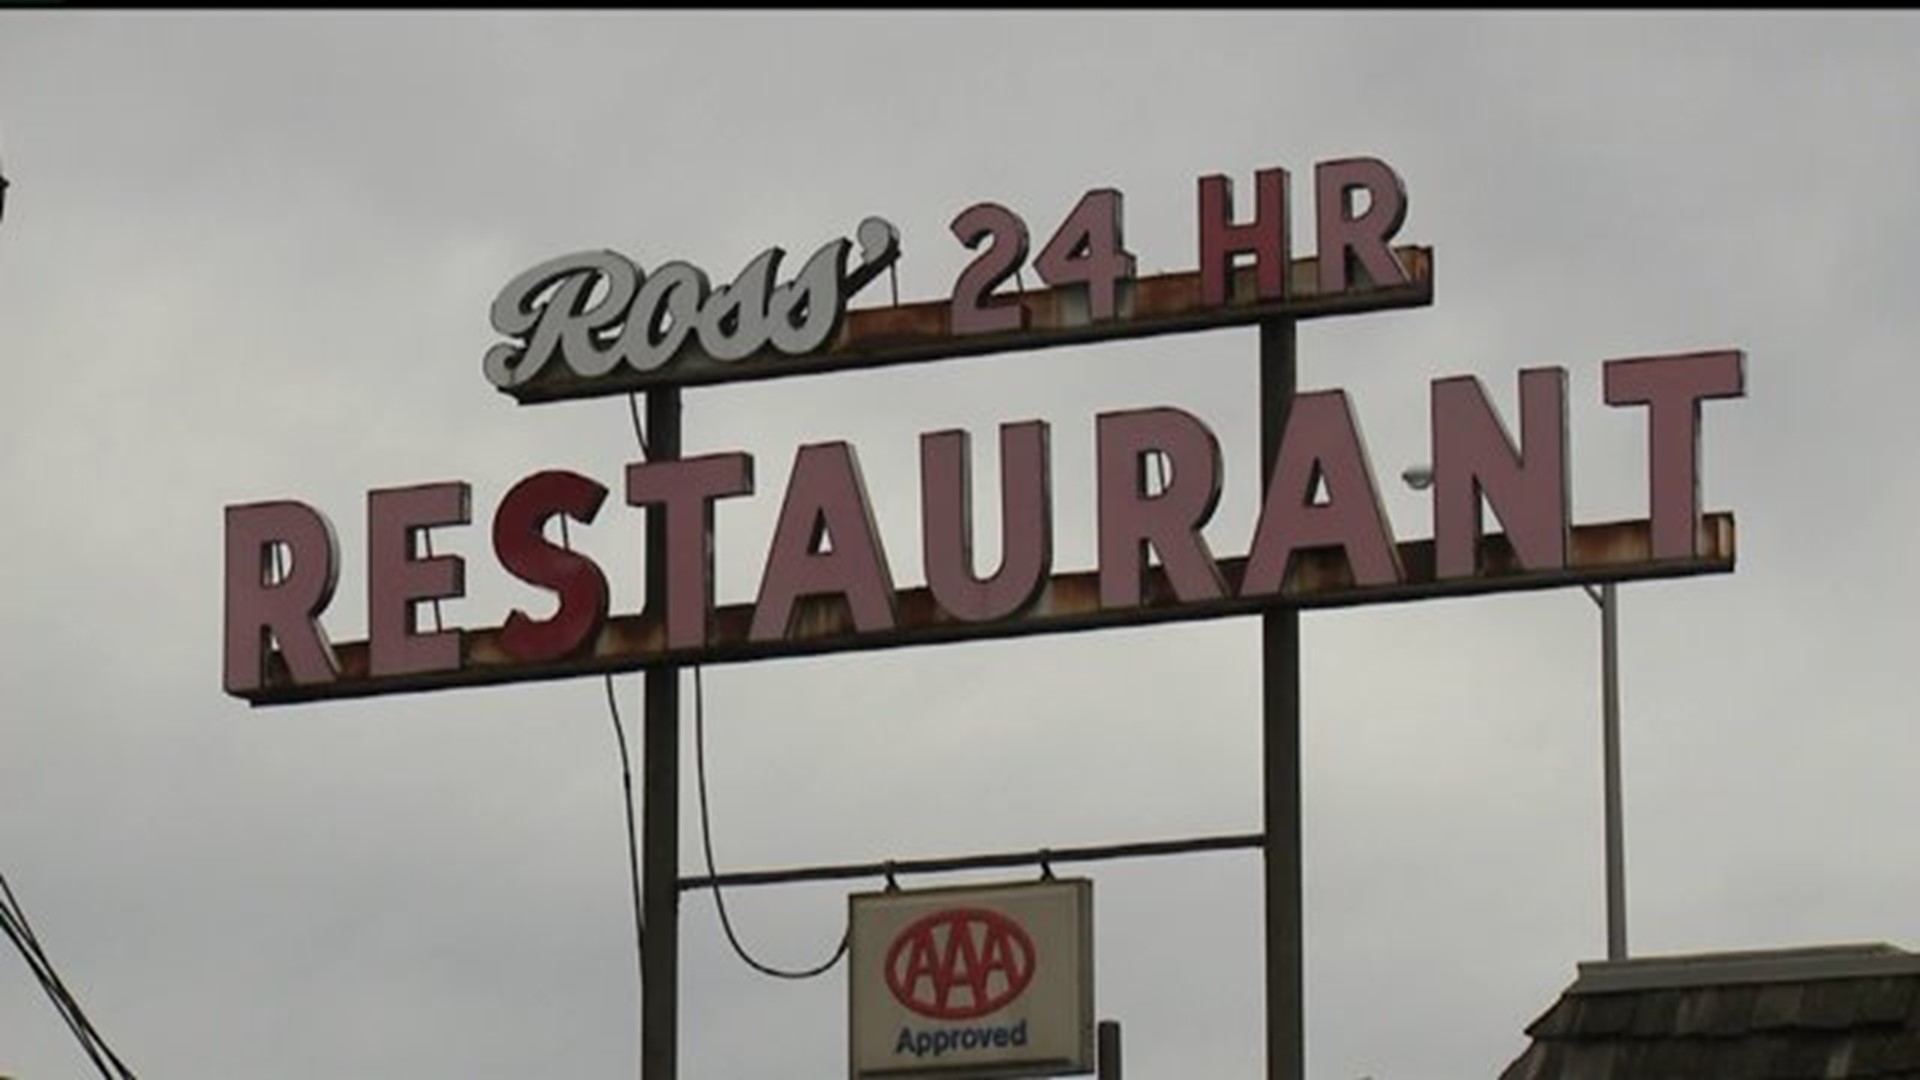 Ross` Restaurant to stay in Bettendorf